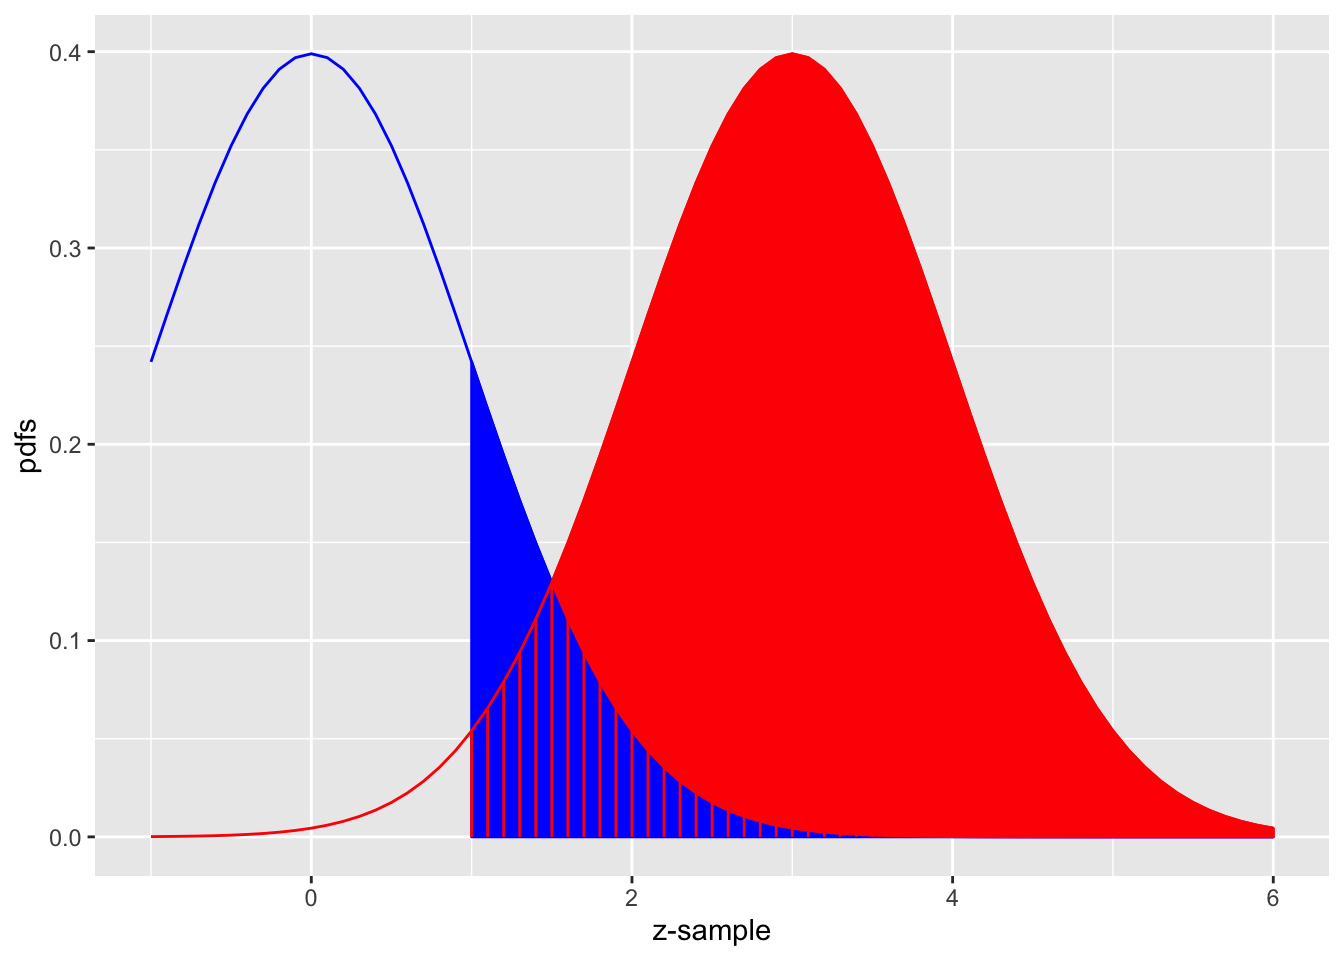 The equal-variance binormal model for $\mu = 3$  and  $\zeta = 1$; the blue curve, centered at zero, is the pdf of non-diseased cases and the red one, centered at $\mu = 3$, is the pdf of diseased cases. The left edge of the blue shaded region represents the threshold $\zeta = 1$. The red shaded area including the common portion with the vertical red lines is sensitivity. The blue shaded area including the common portion with the vertical red lines is 1-specificity.